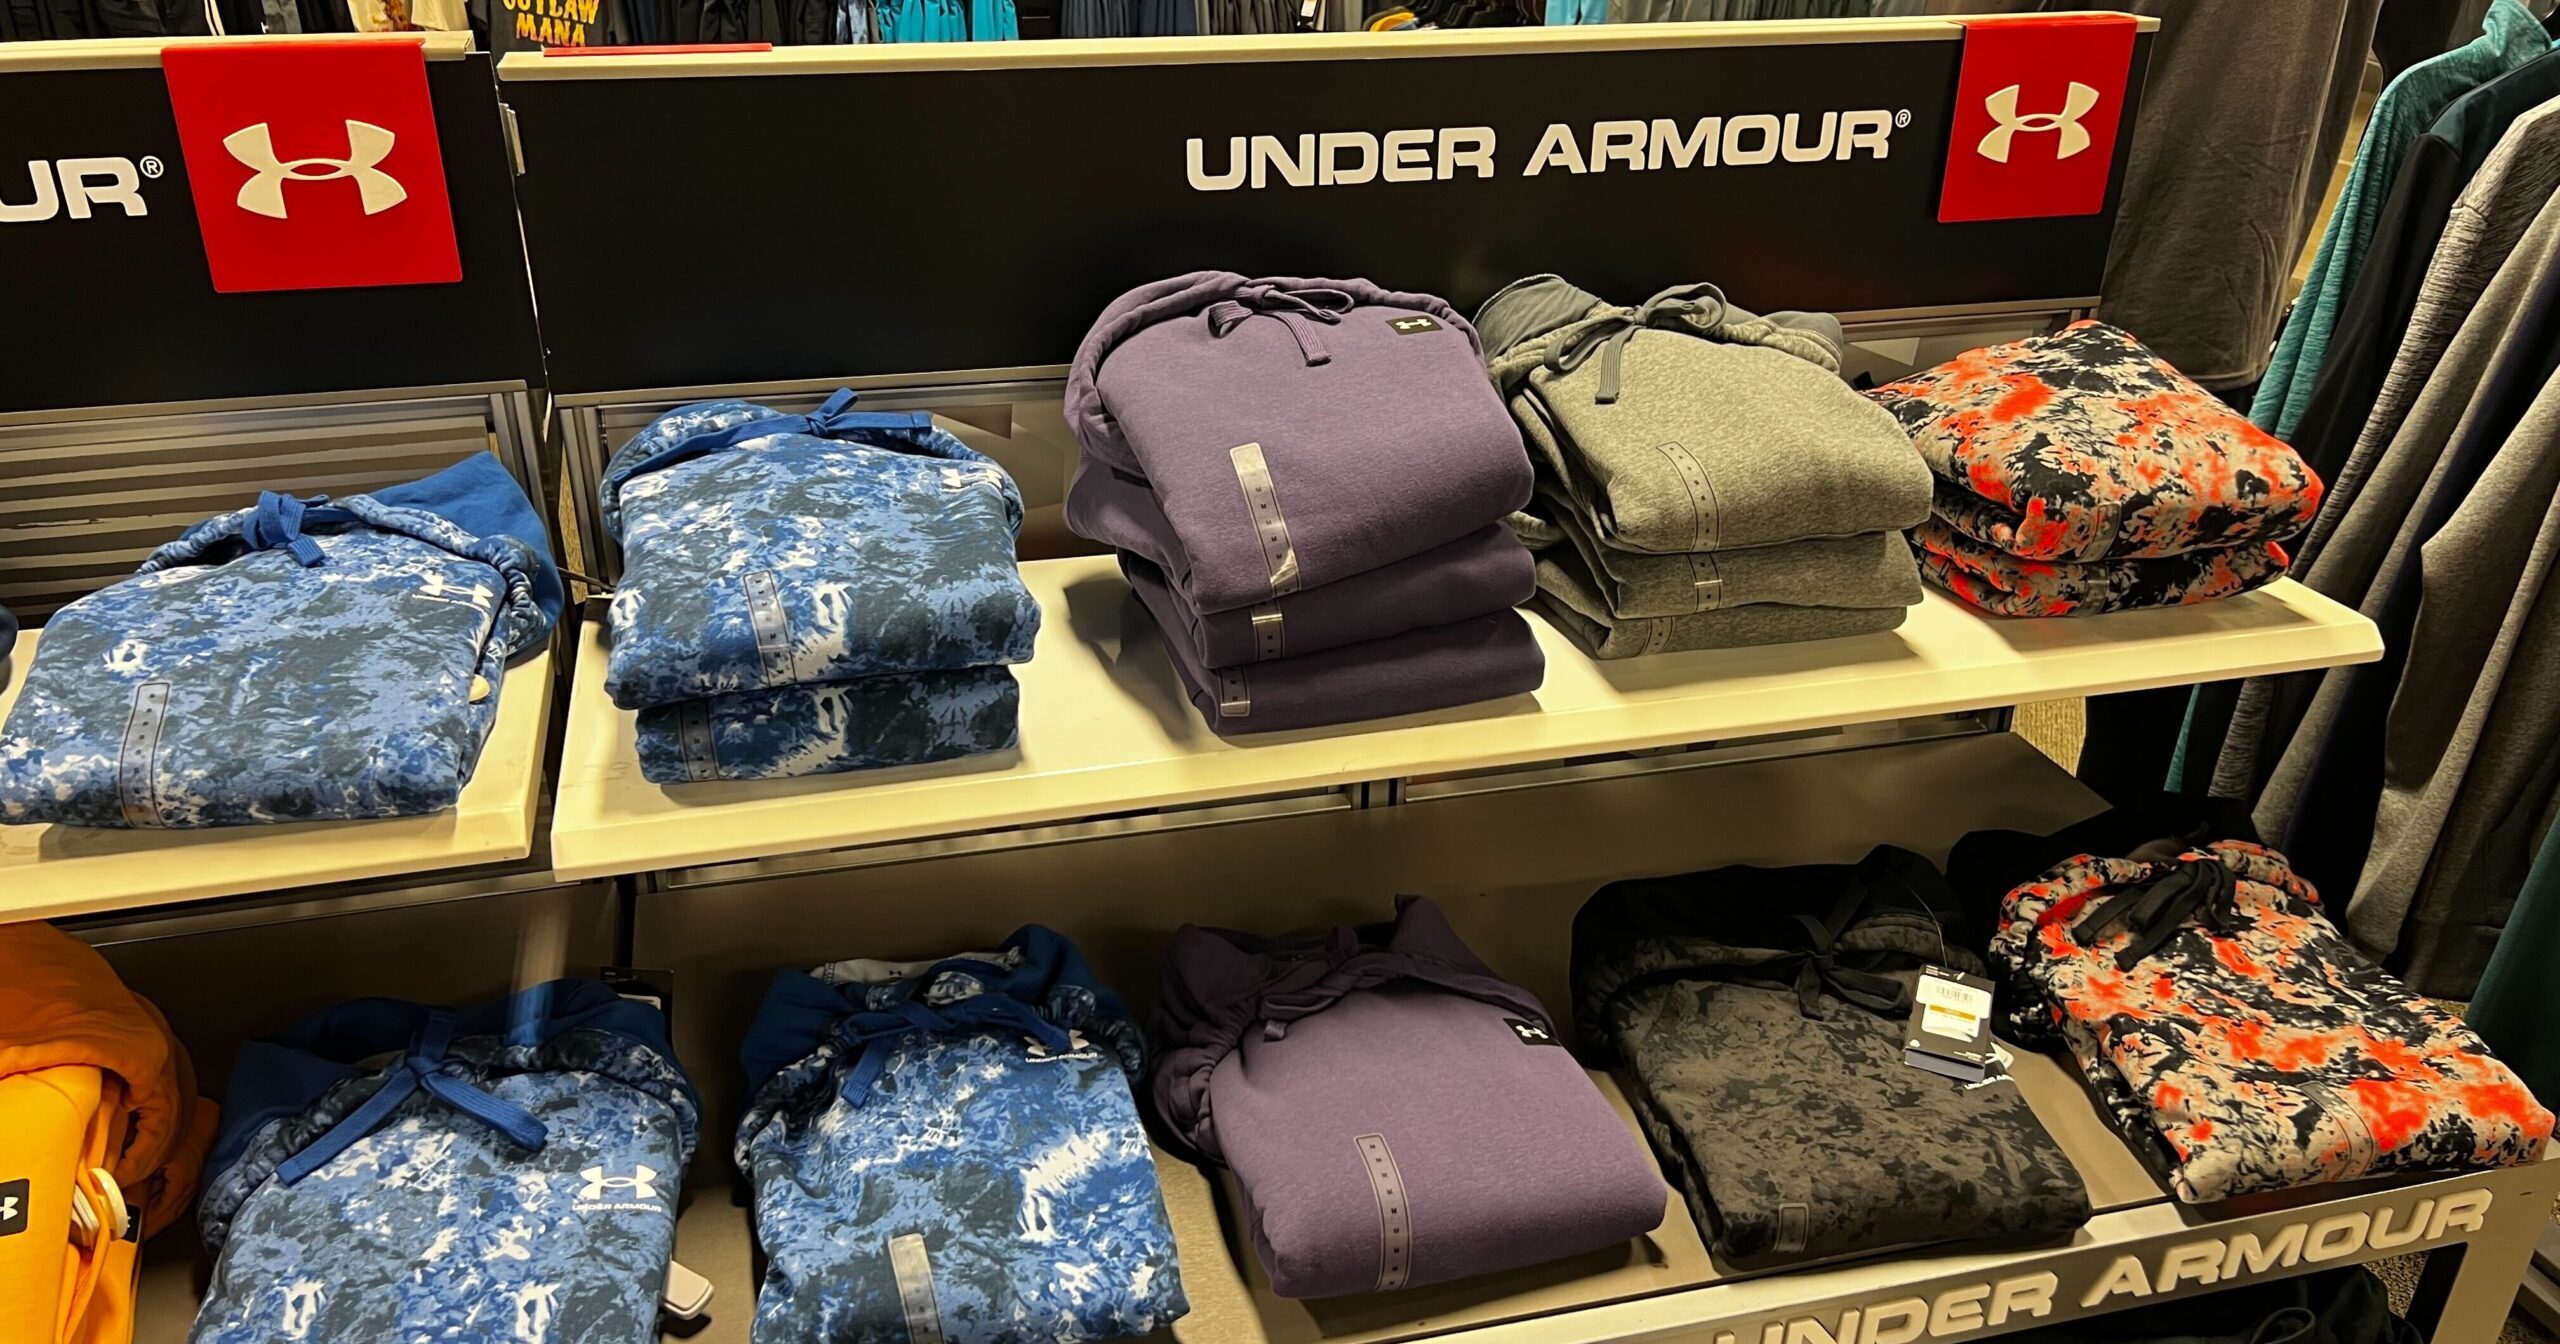 Under Armour Outlet - Buy More Save More: Off 1 Item, 30% 2 Items 35% Off 3 Items - The Freebie Guy®